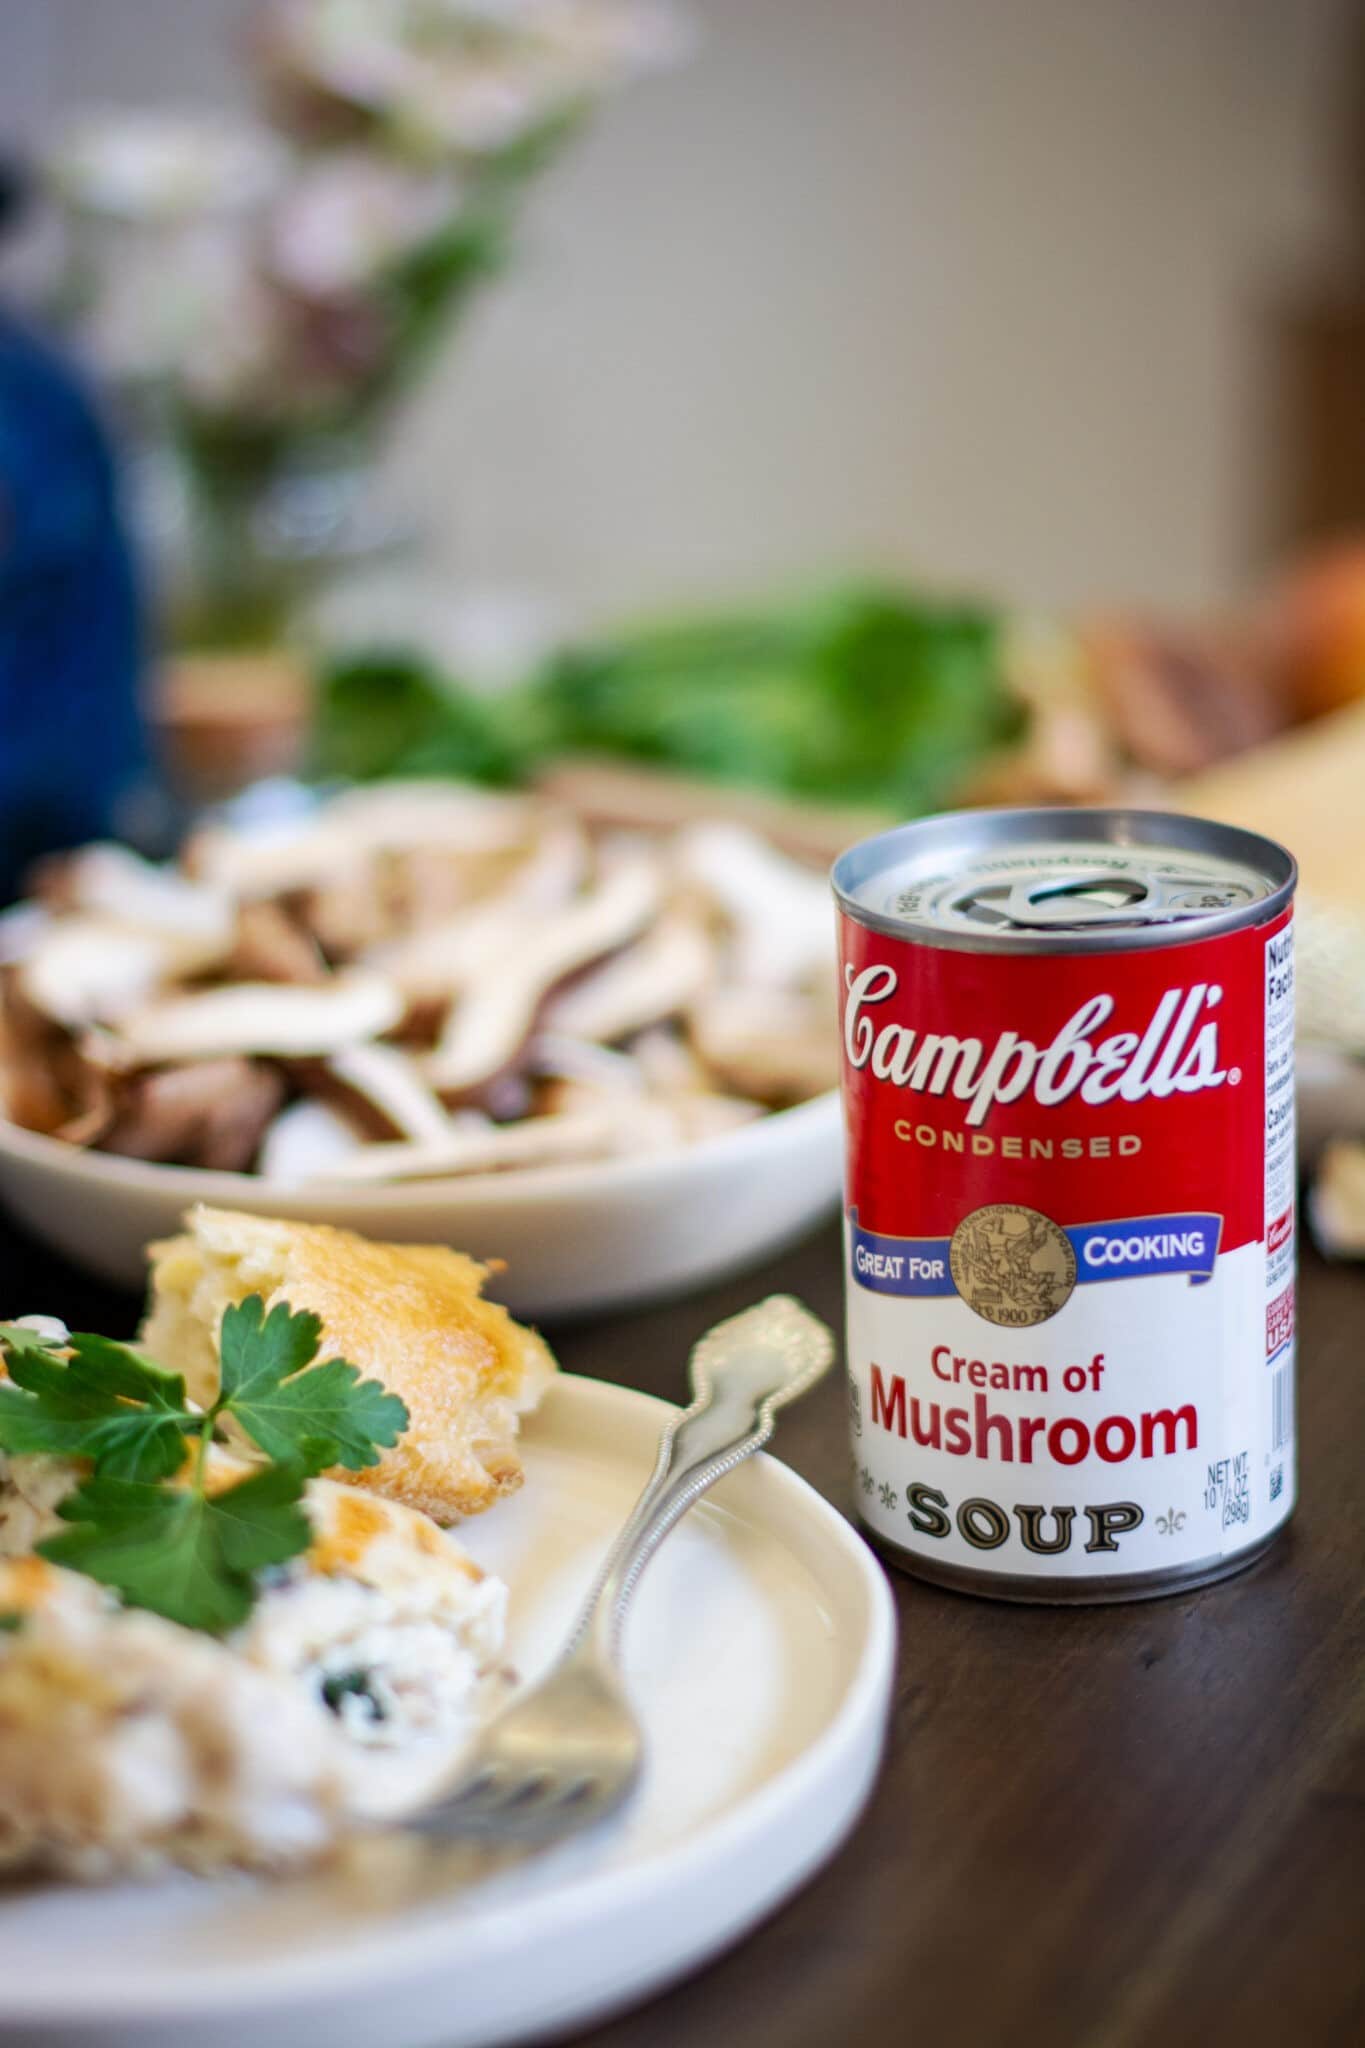 Manicotti on white plate with a can of Campbells Cream of Mushroom Soup on wood table